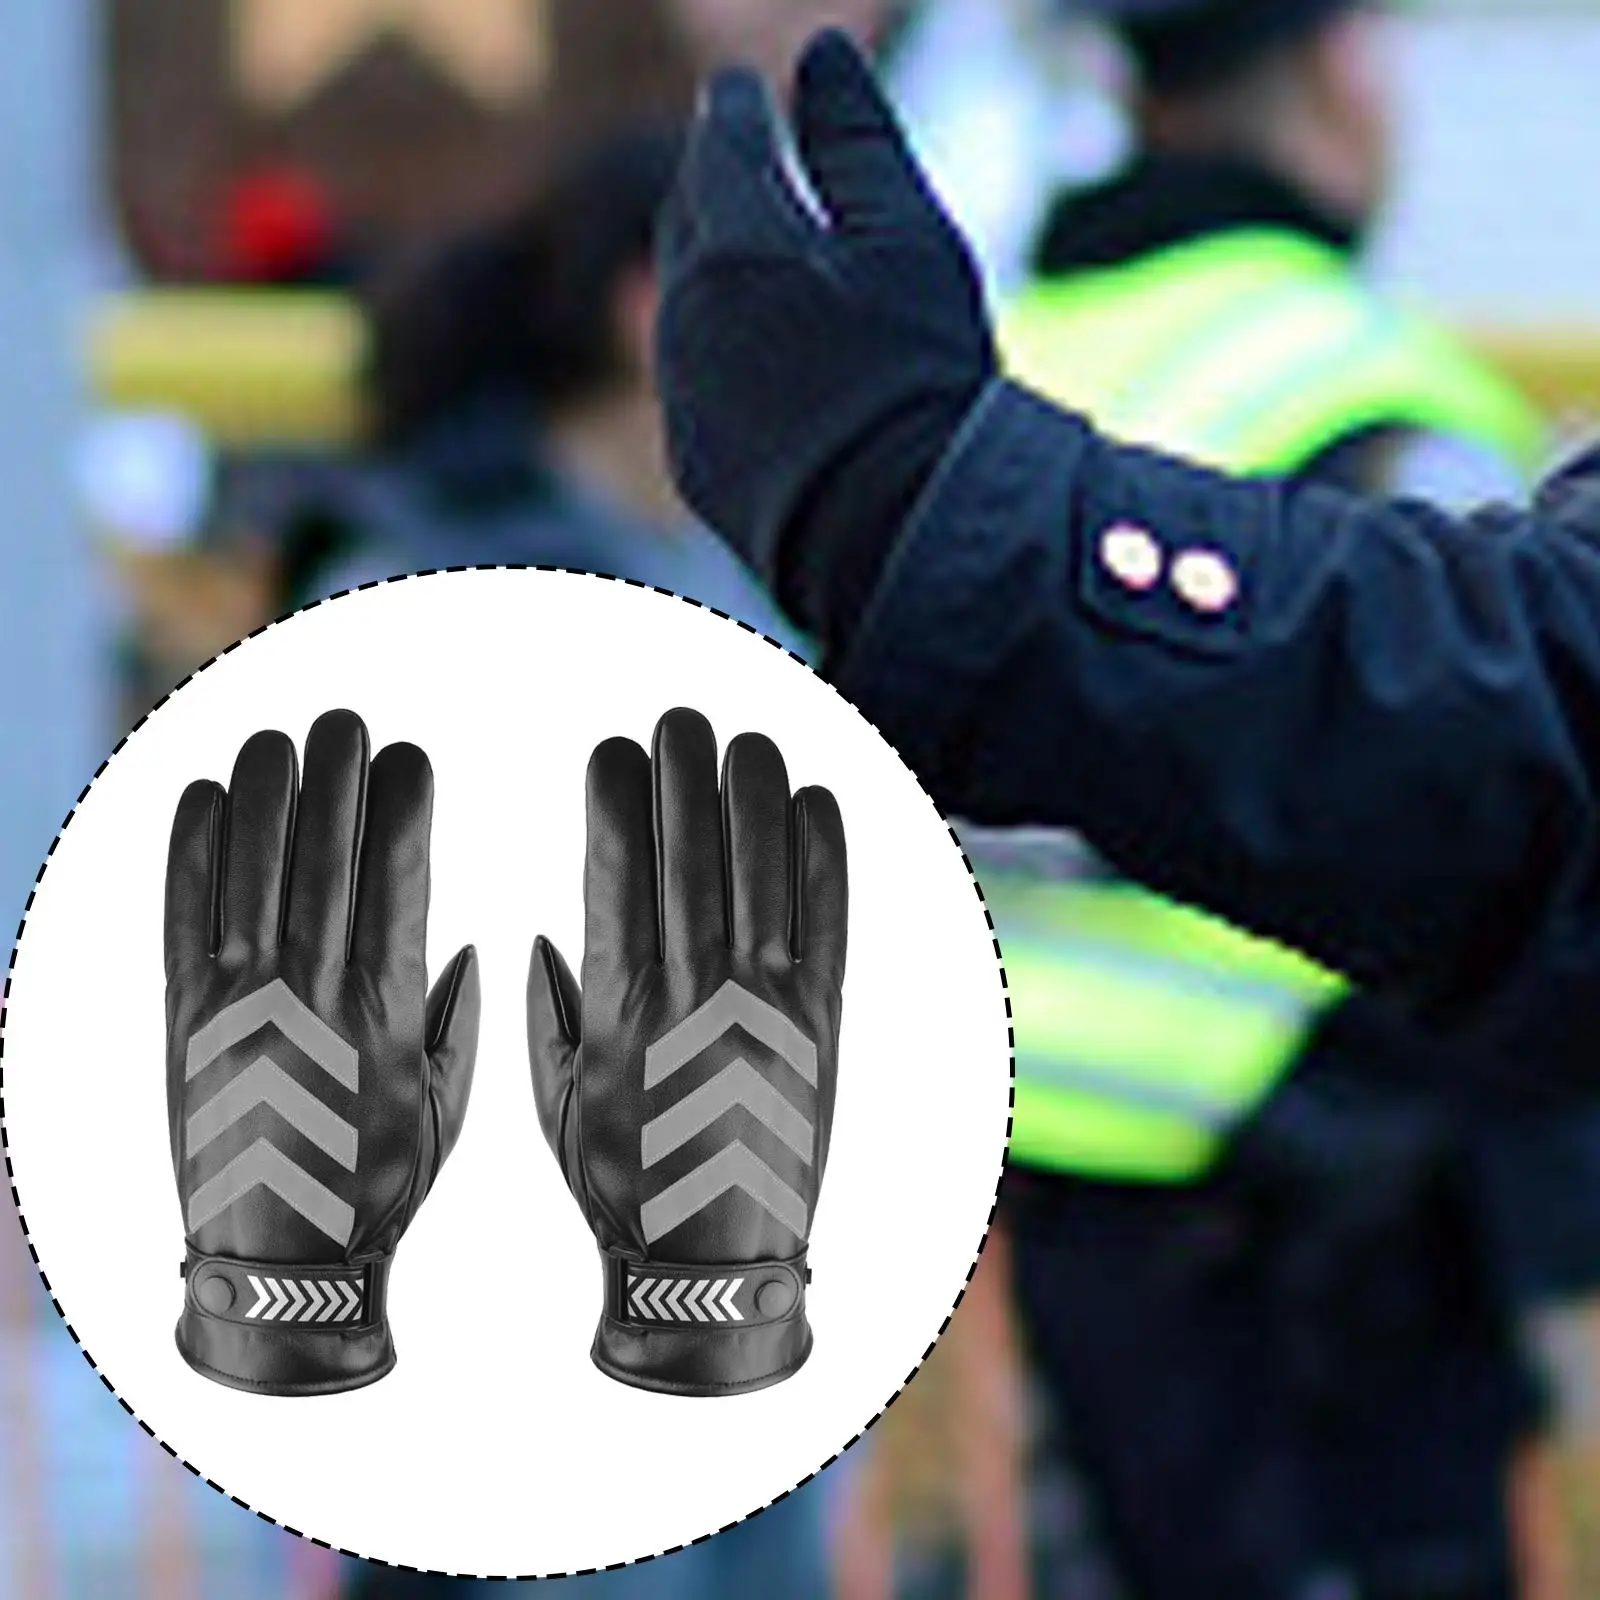 Winter Gloves Touch Screen Ski Gloves Thermal Gloves Water Resistance Cycling